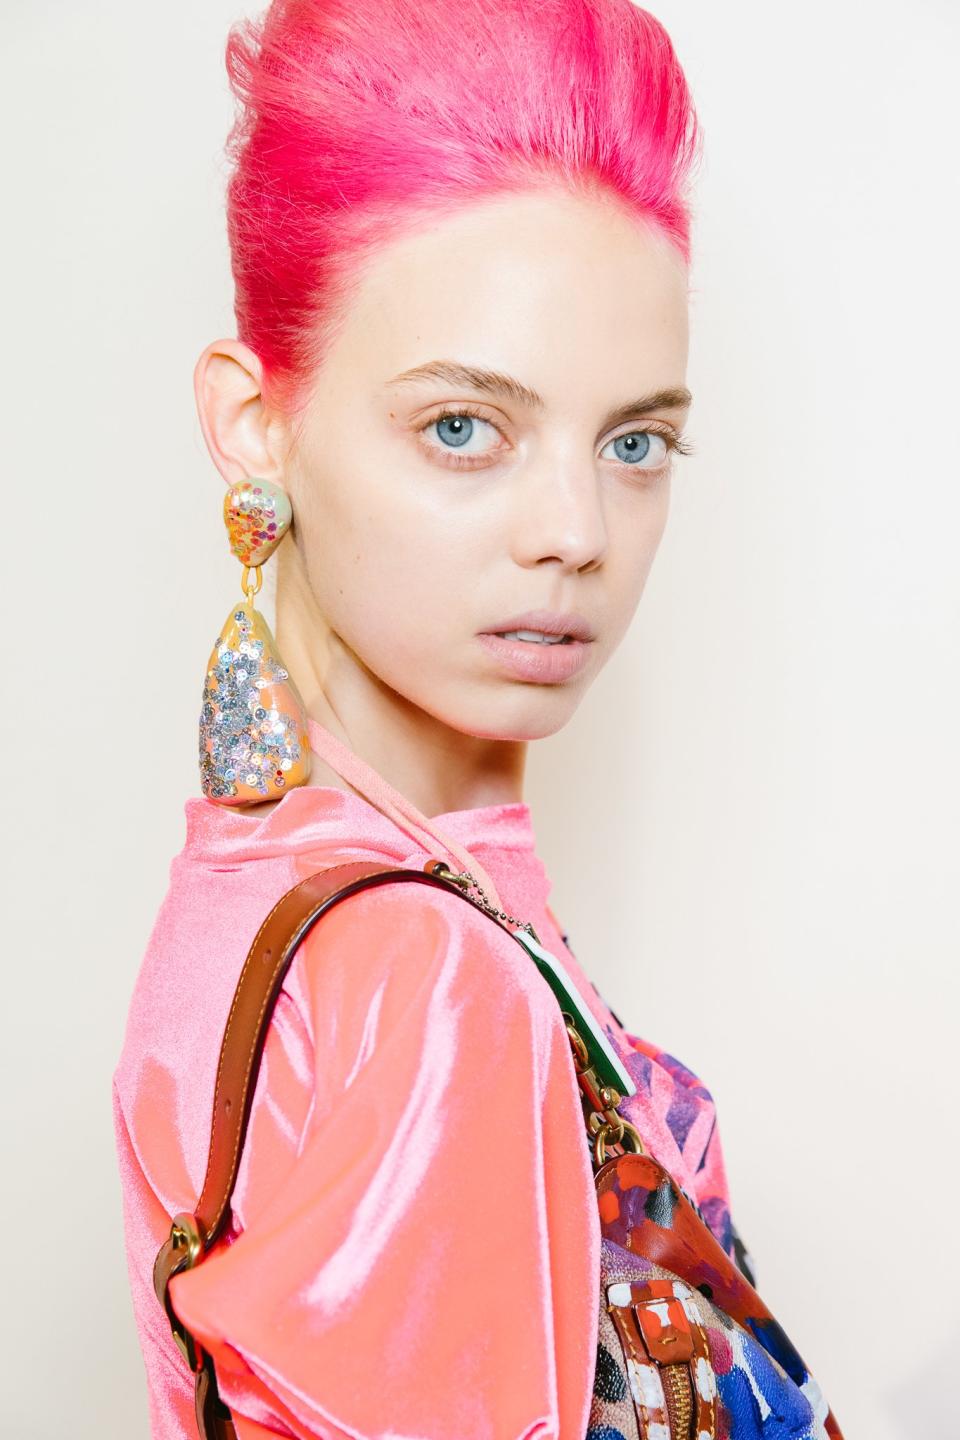 Hot Pink Hair! Printed Buzz Cuts! Punk is the New Pretty at London Fashion Week